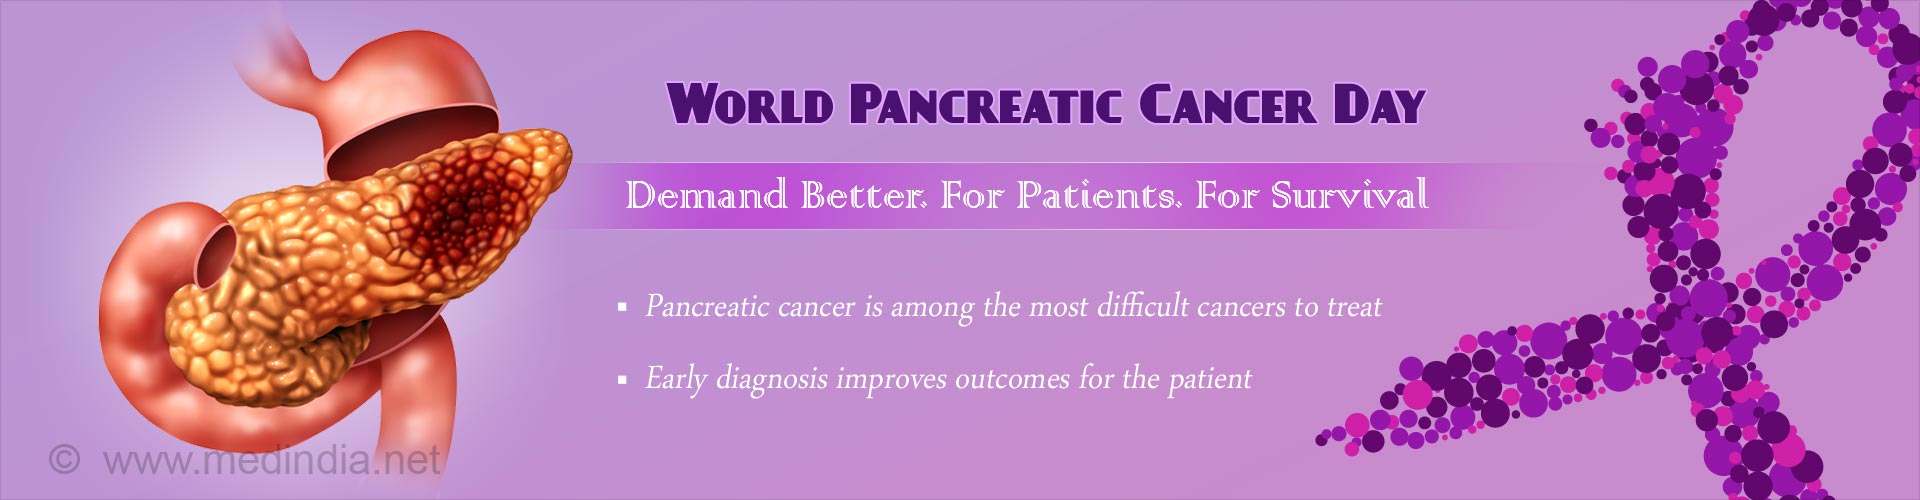 world pancreatic cancer day: demand better. for patients. for survival
- pancreatic cancer is among the most difficult cancers to treat
- early life diagnosis improves outcomes for the patient 